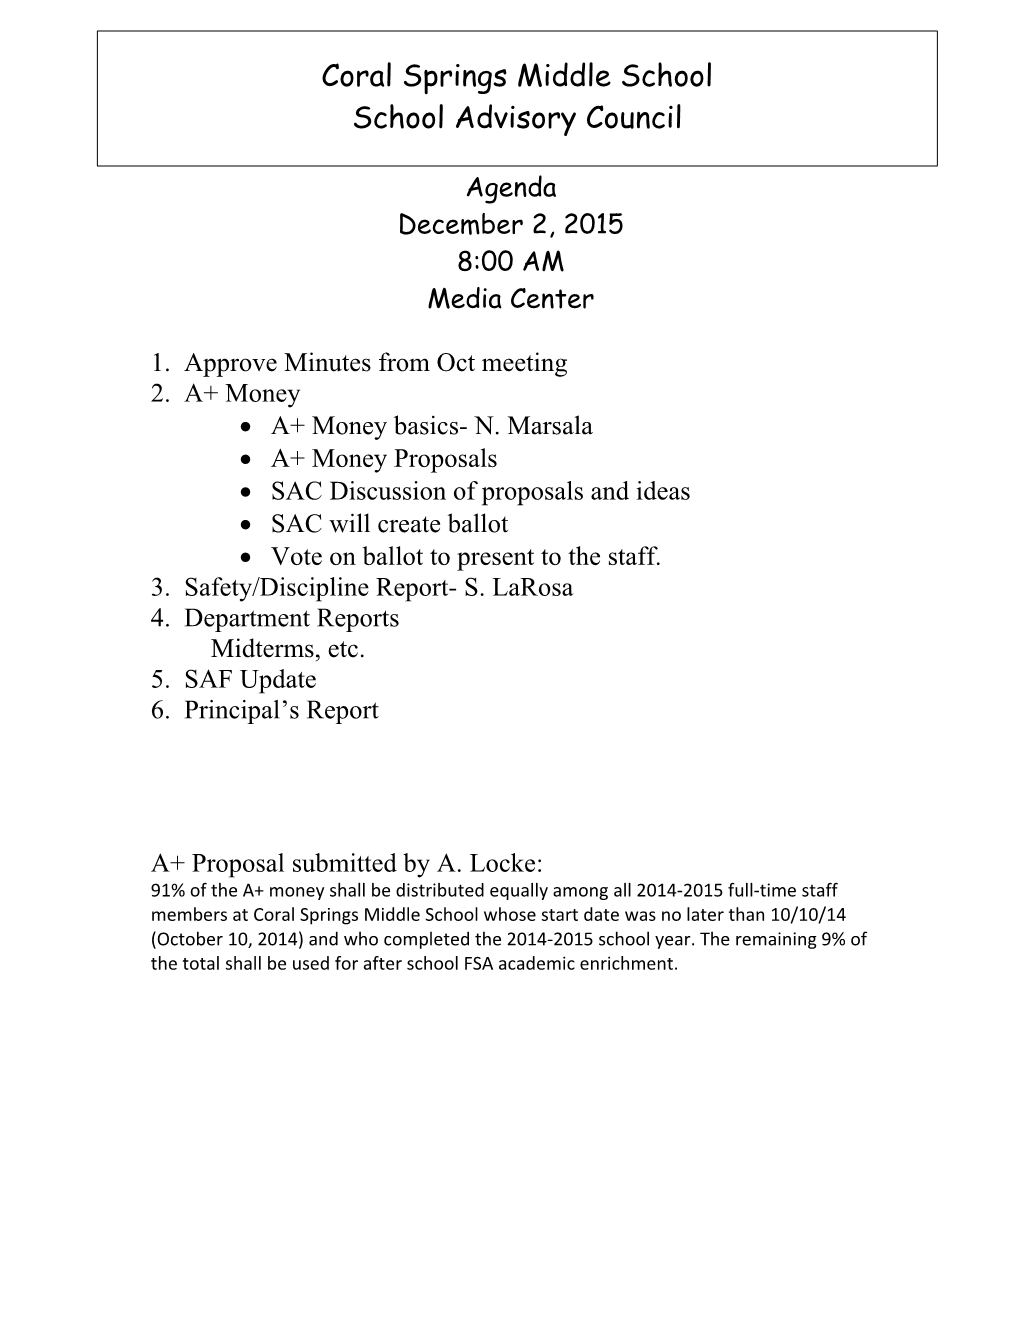 1. Approve Minutes from Oct Meeting